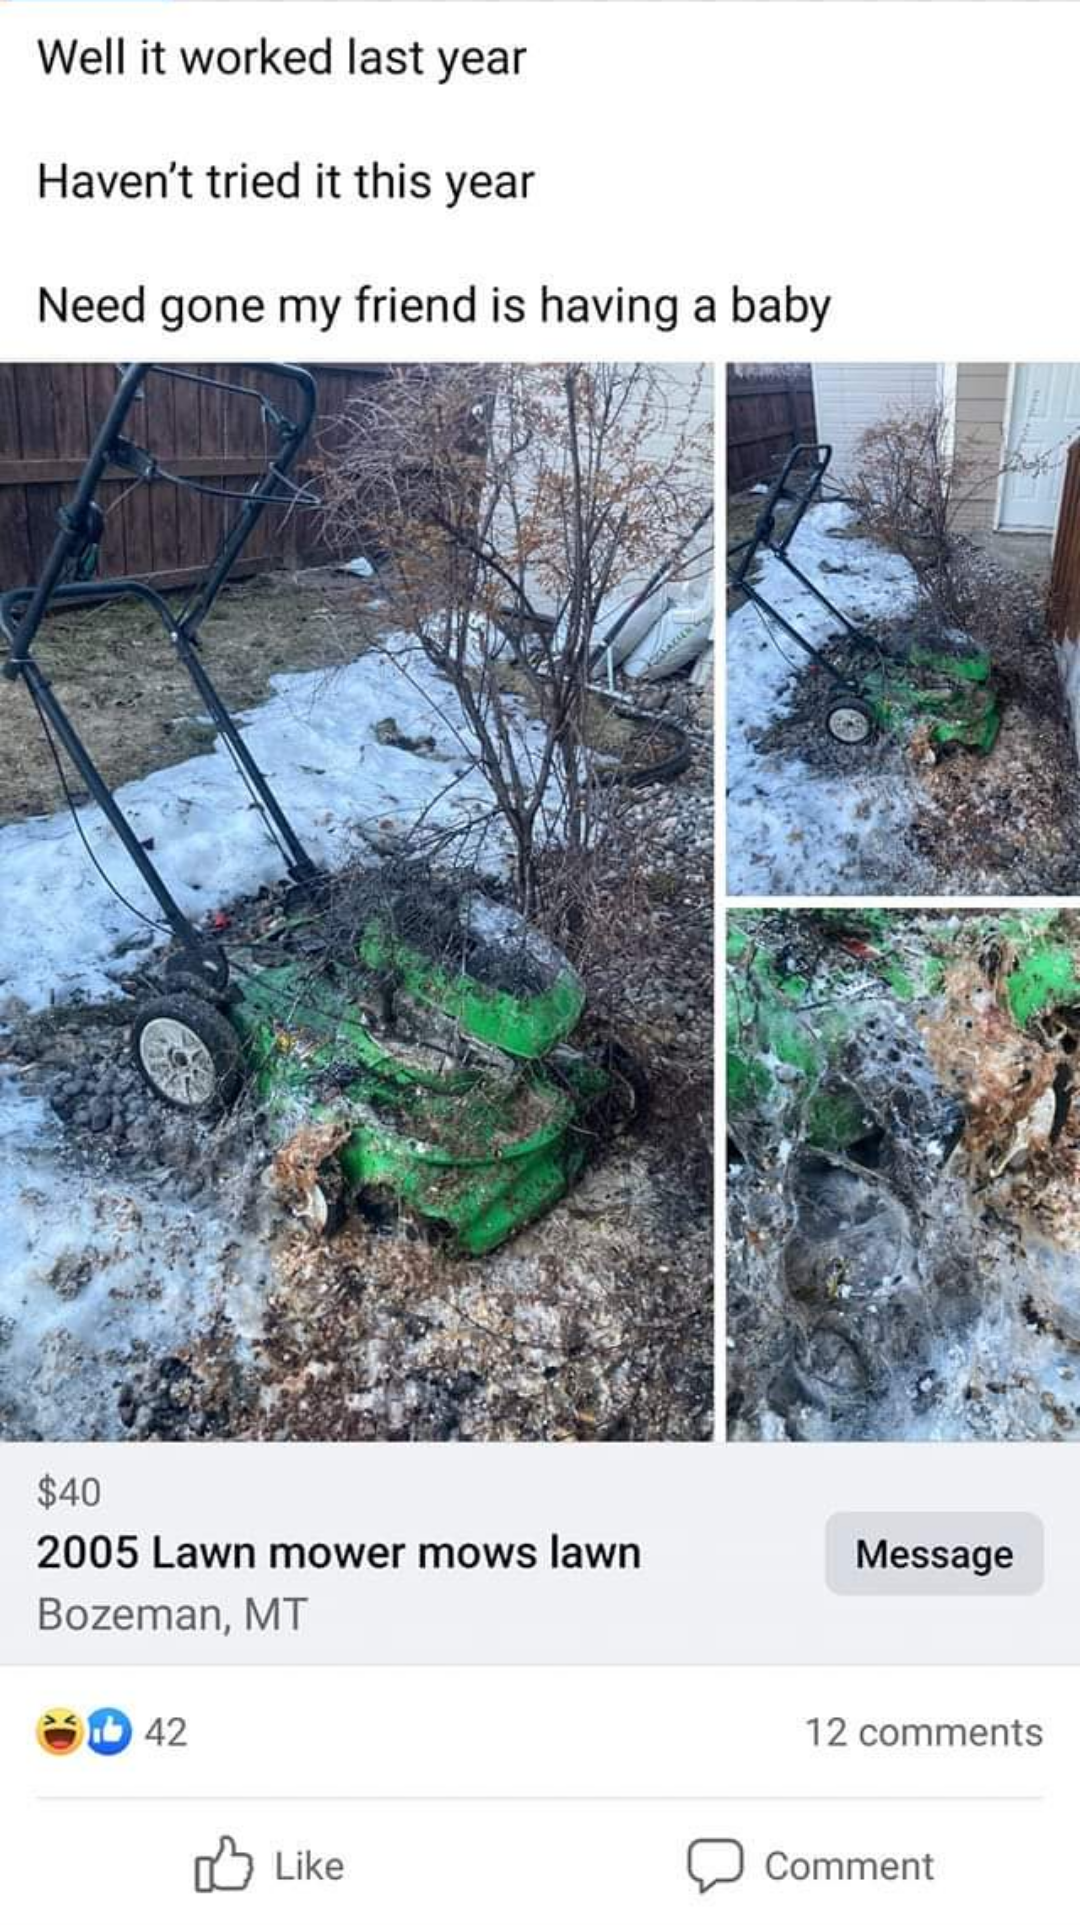 A lawn mower for $40, covered in grass rests in a snowy yard; caption jokes about not used this year but it worked last year